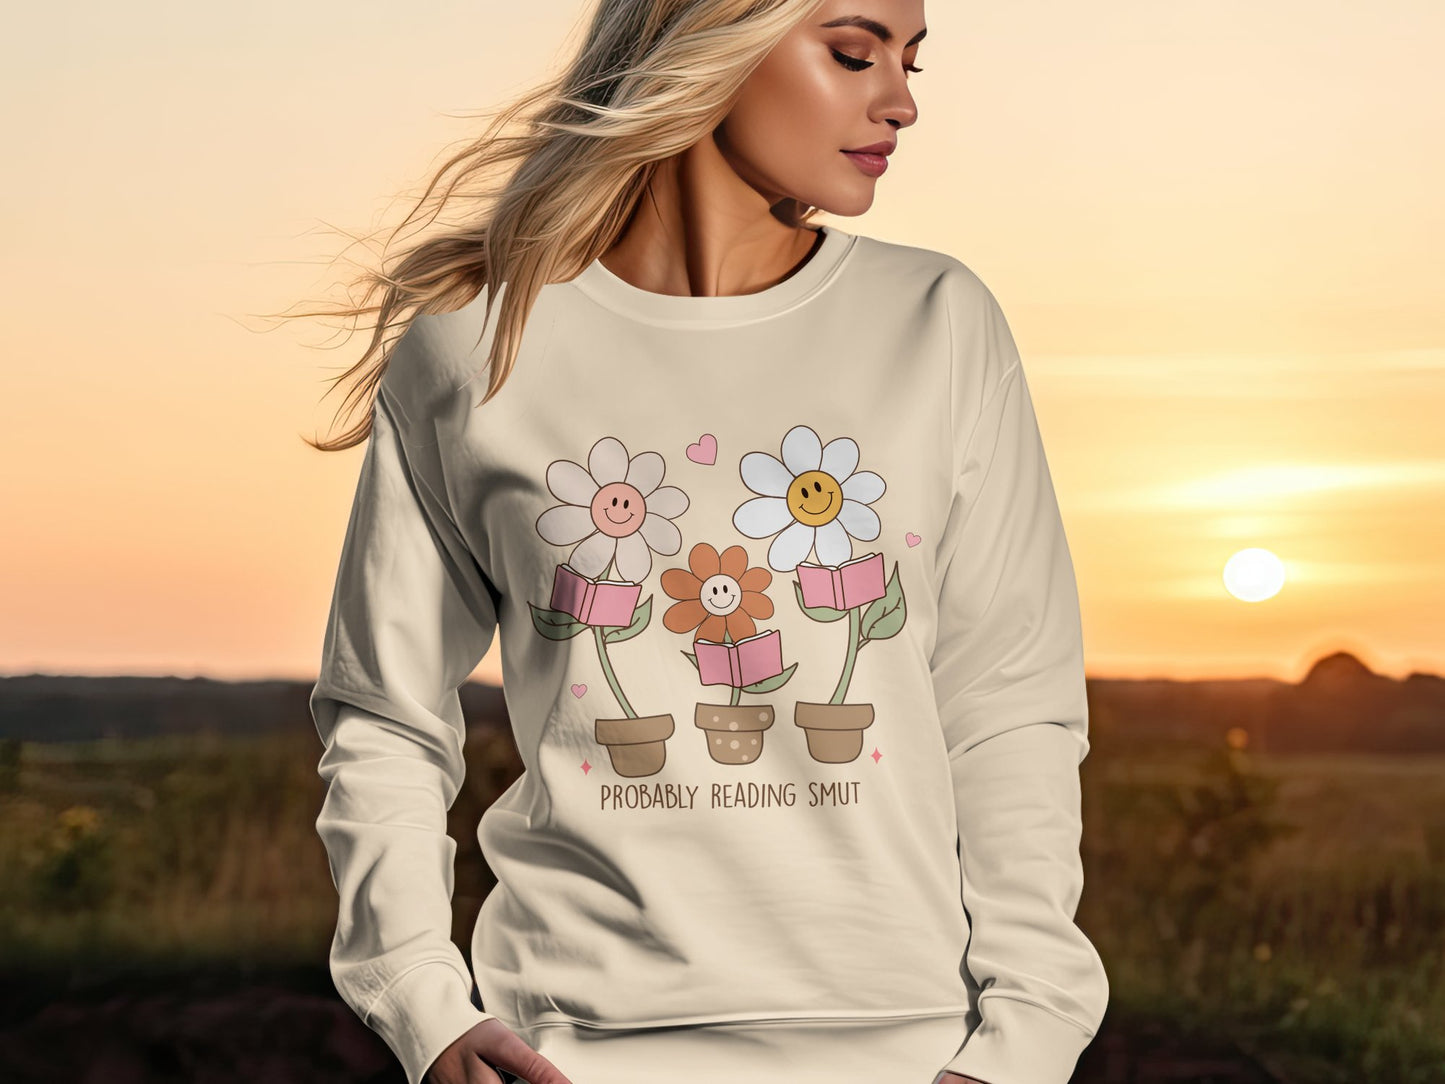 Funny "Probably Reading Smut" with Smiling Flowers Reading Graphic Sweatshirt, Unisex Cozy Comfortable Pullover, Casual Book Lover Apparel, Unisex Heavy Blend™ Crewneck Sweatshirt